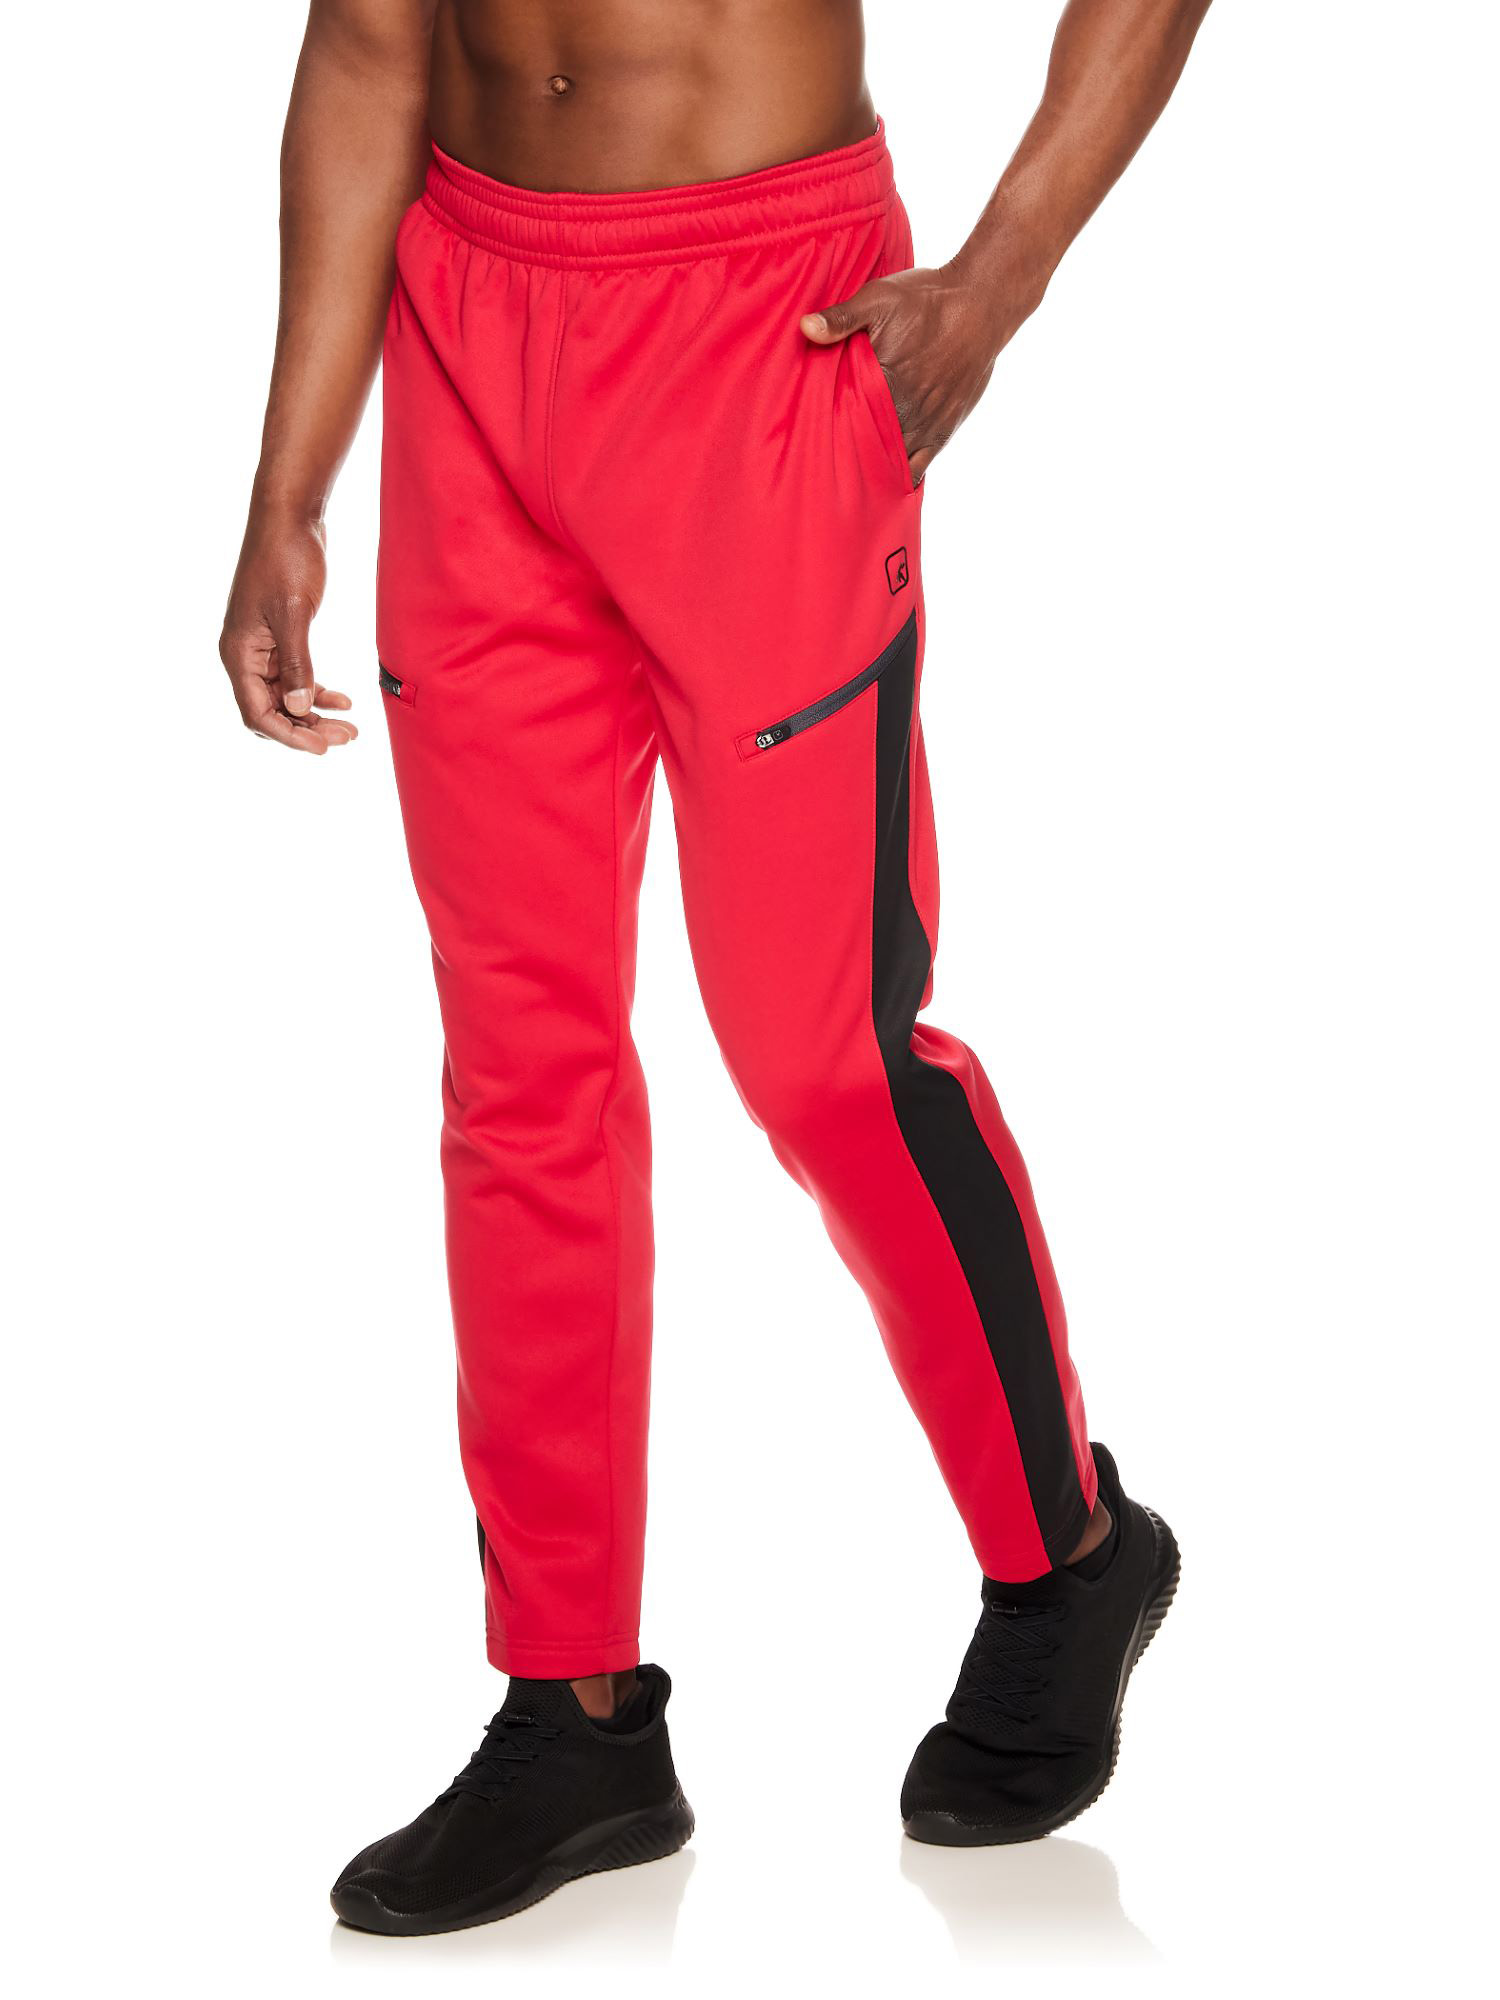 And1 Men's and Big Men's Deflection Pants, Sizes S-5X - image 3 of 4